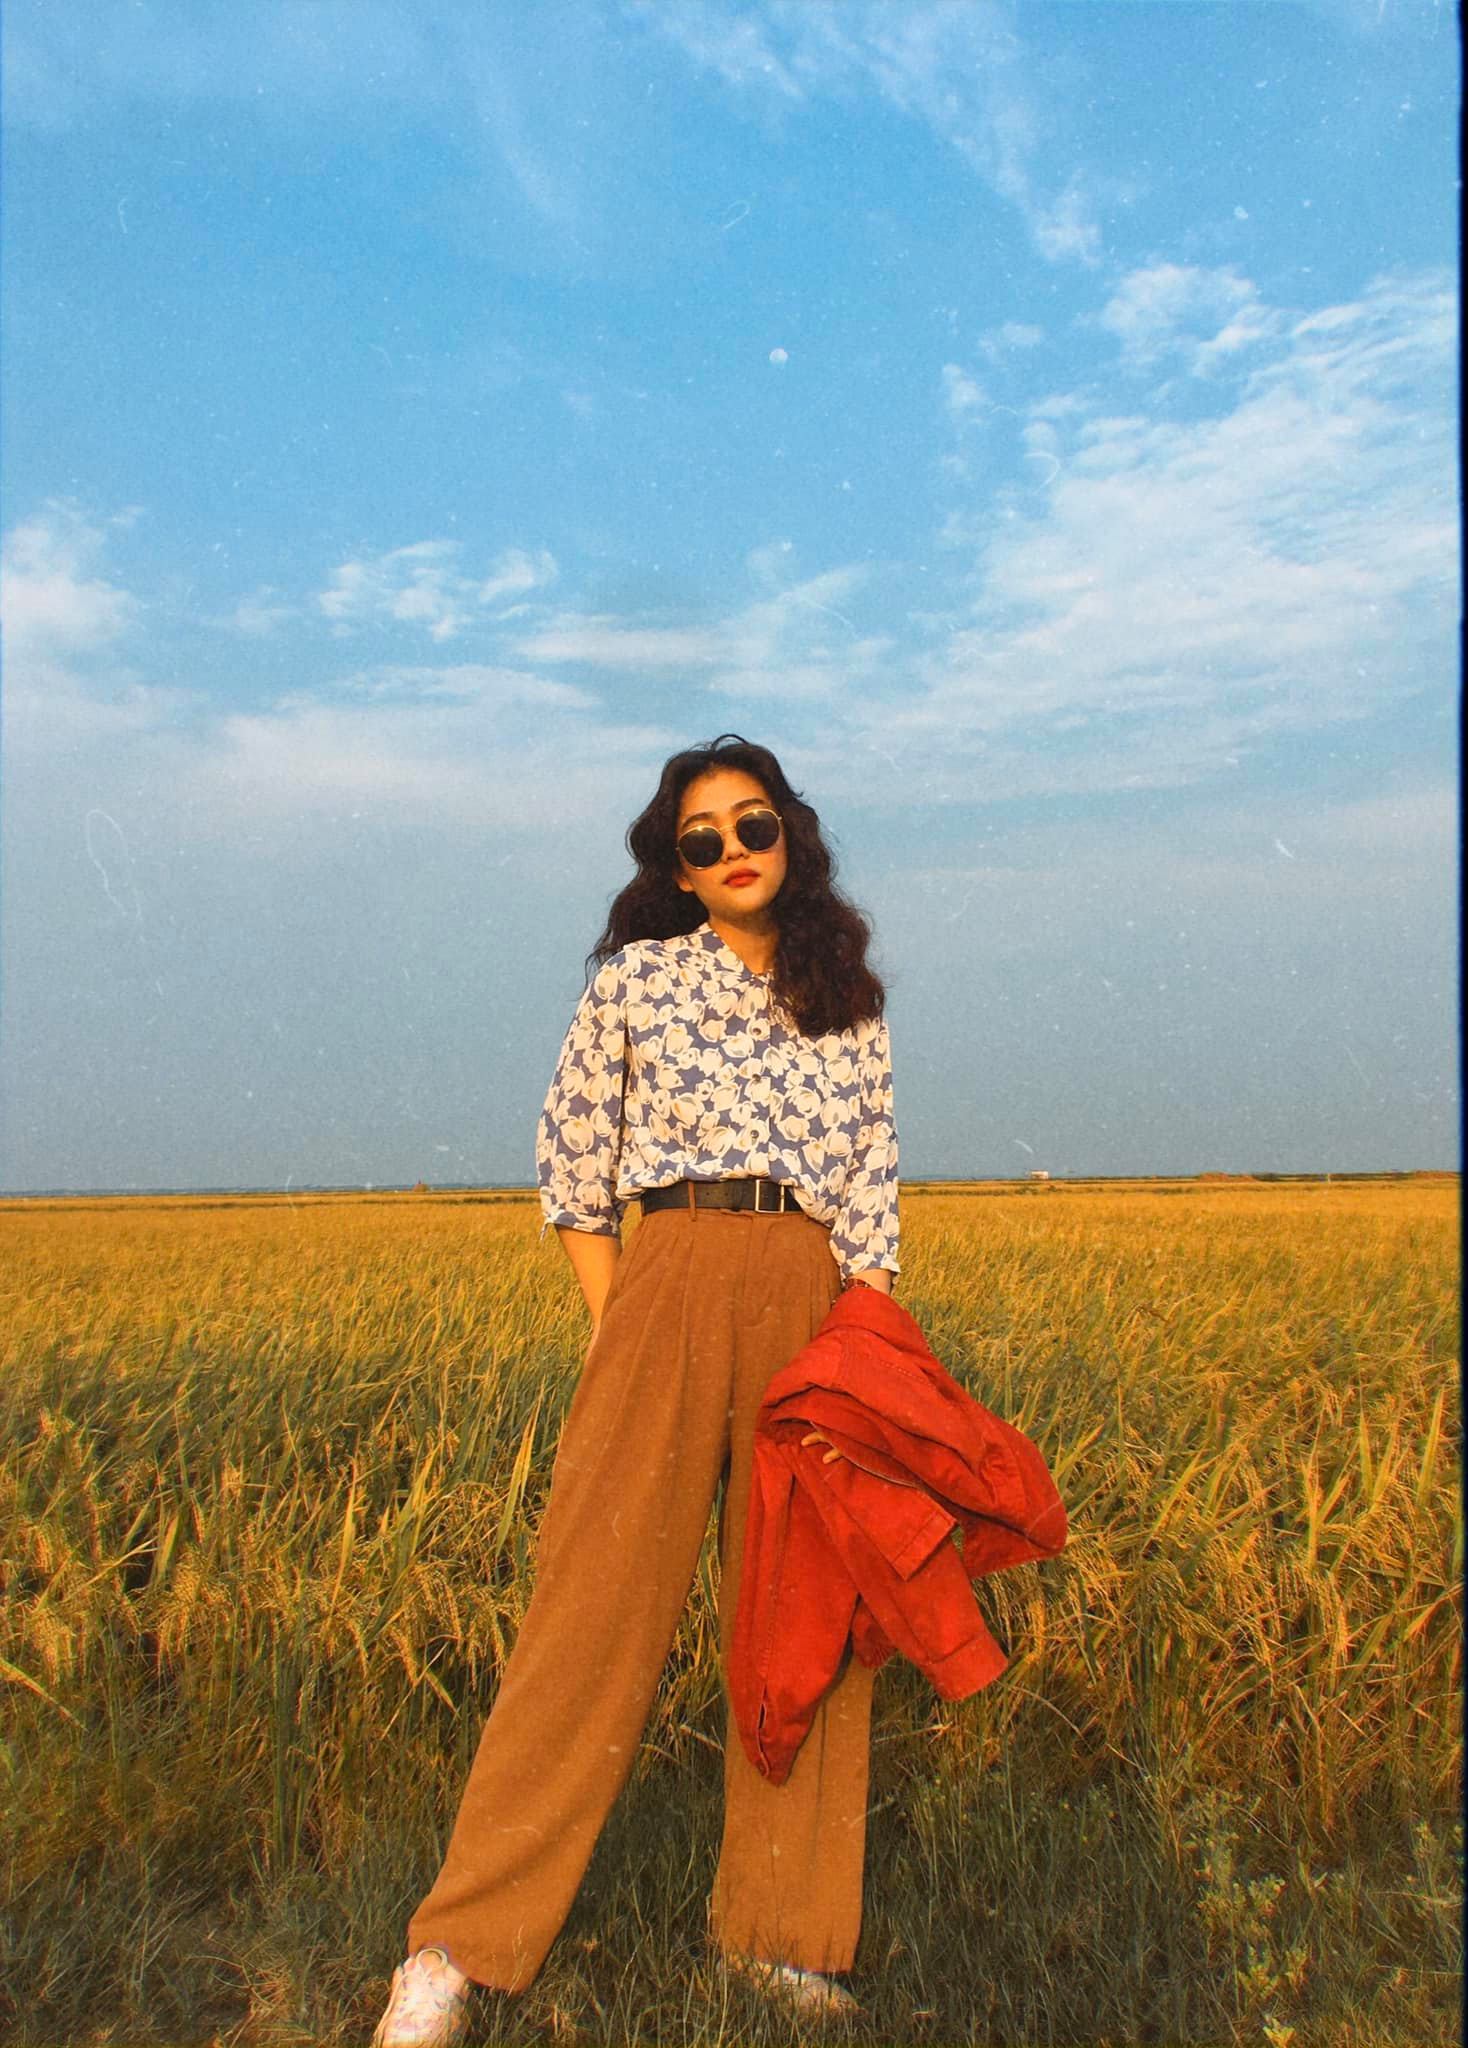 No need to go to expensive cafes, maybe the rice field near your house is the ideal place to take pictures to catch the 90s Hong Kong trend.